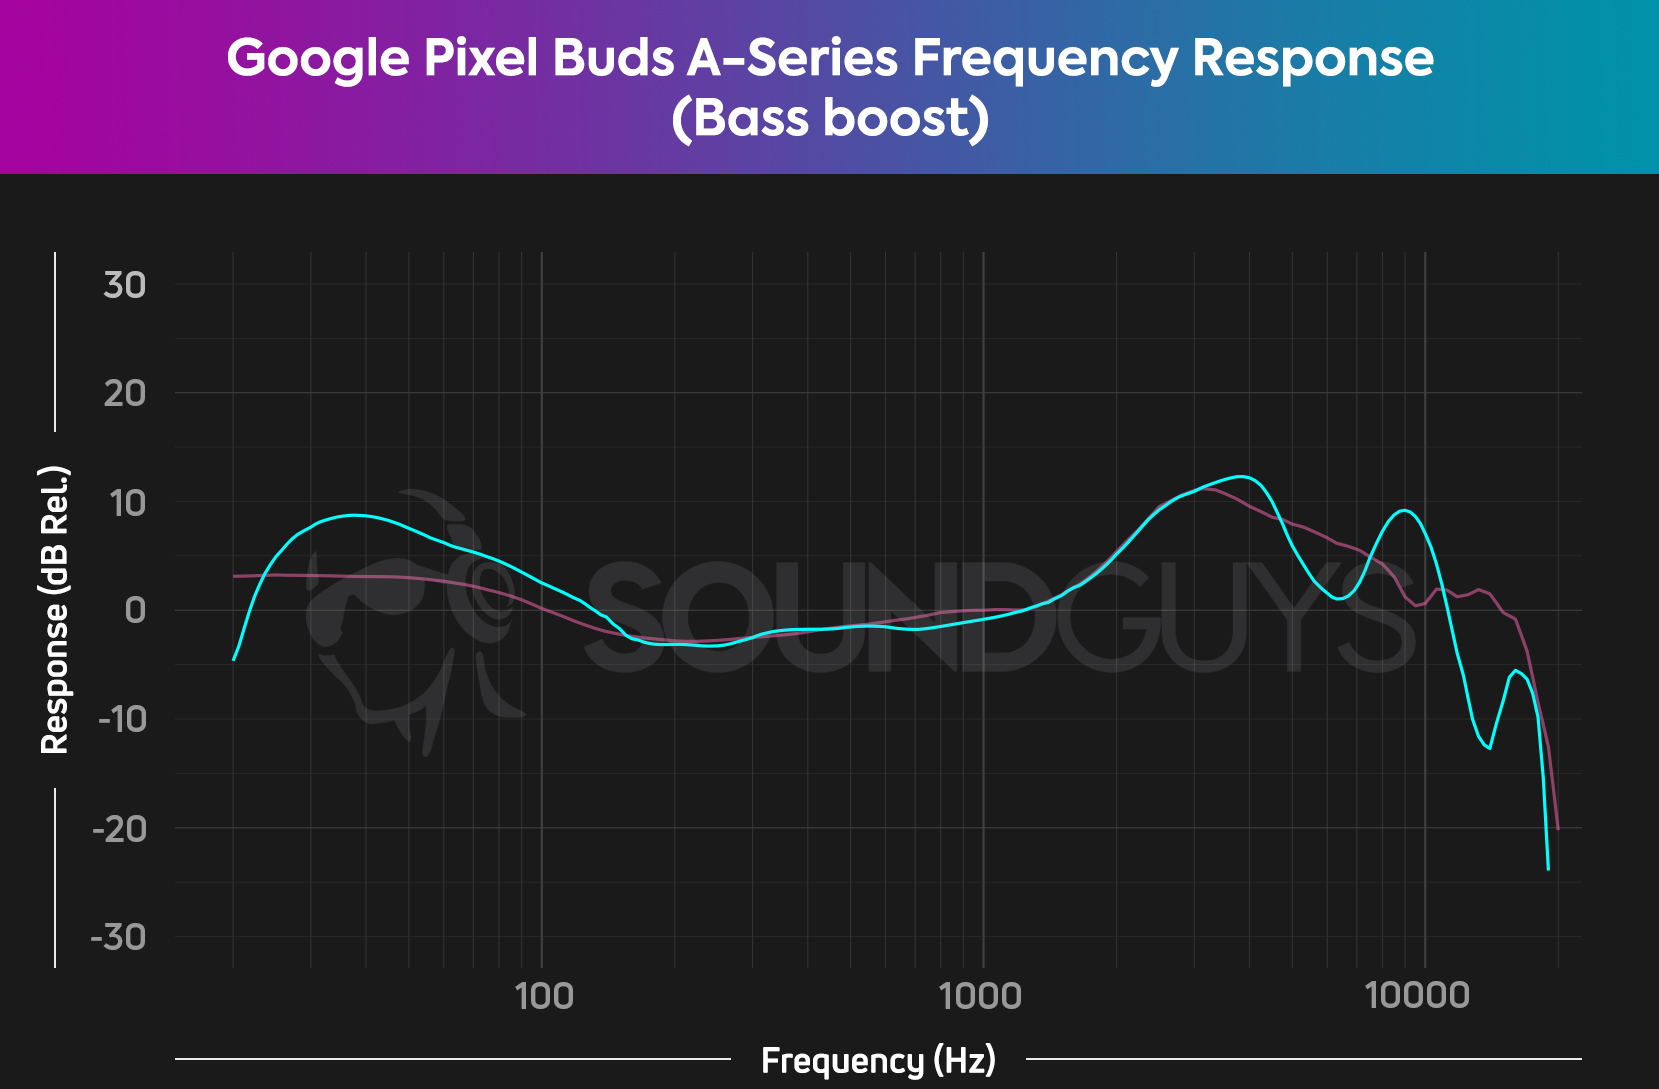 A frequency response chart showing the performance of the Google Pixel Buds A-Series with the Bass Boost option enabled.